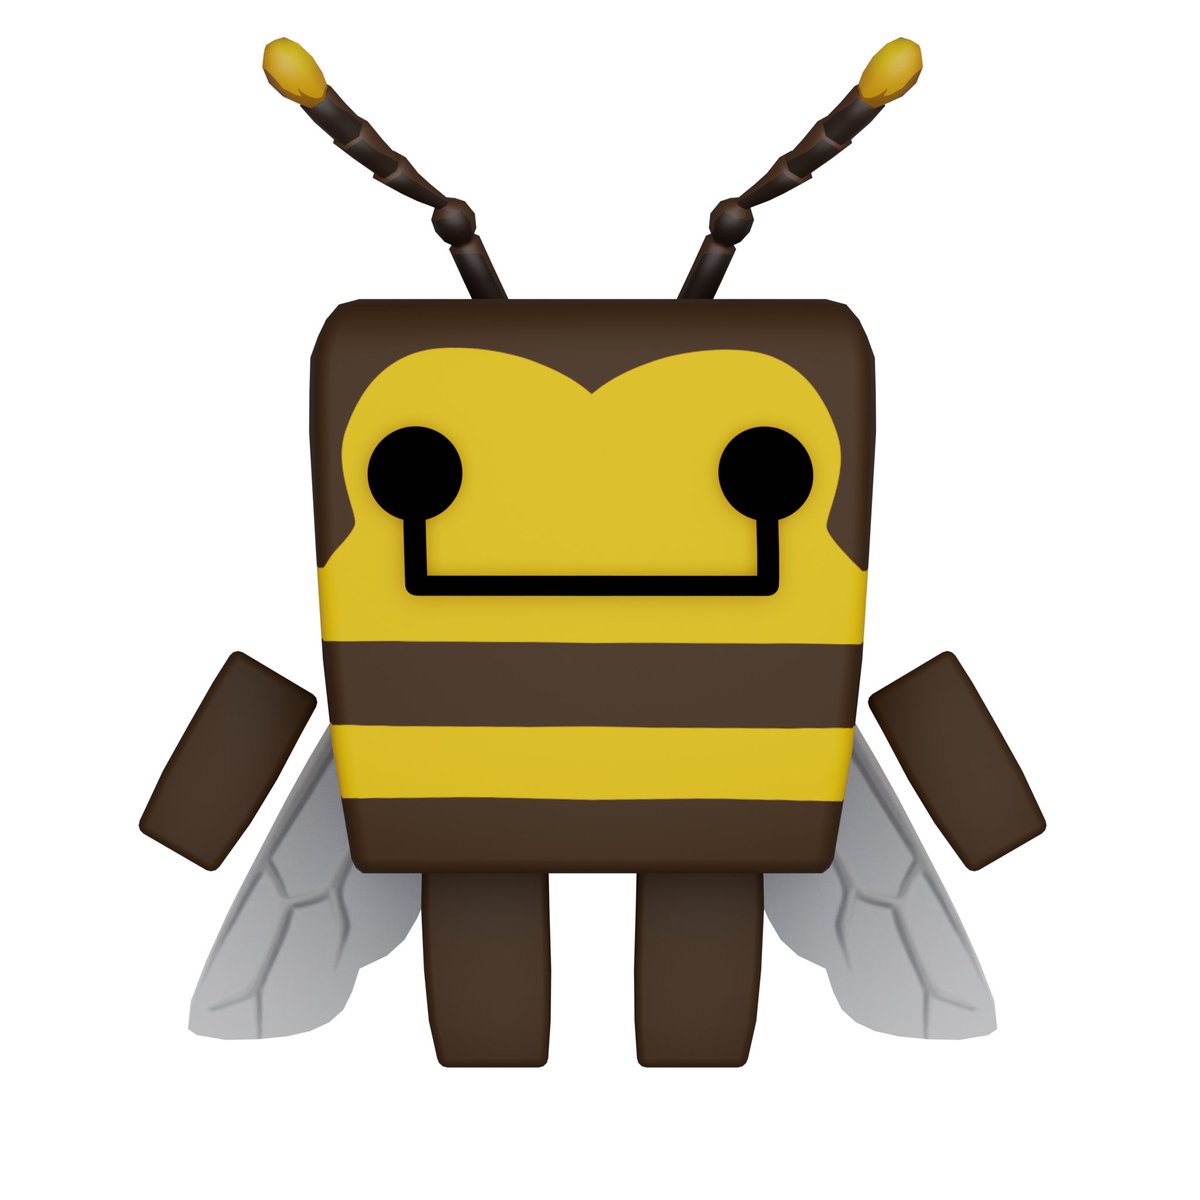 Well, I’ll bee; it's #PollinatorWeek!

To celebrate these little pollinators, have a CuBee equipped for our snapshot on June 23rd at 00:00UTC to receive a Contest Box. Want another free-bee? We will draw 20 lucky CuBee participants to win 25 Crystal Keys!

#CoinHuntWorld